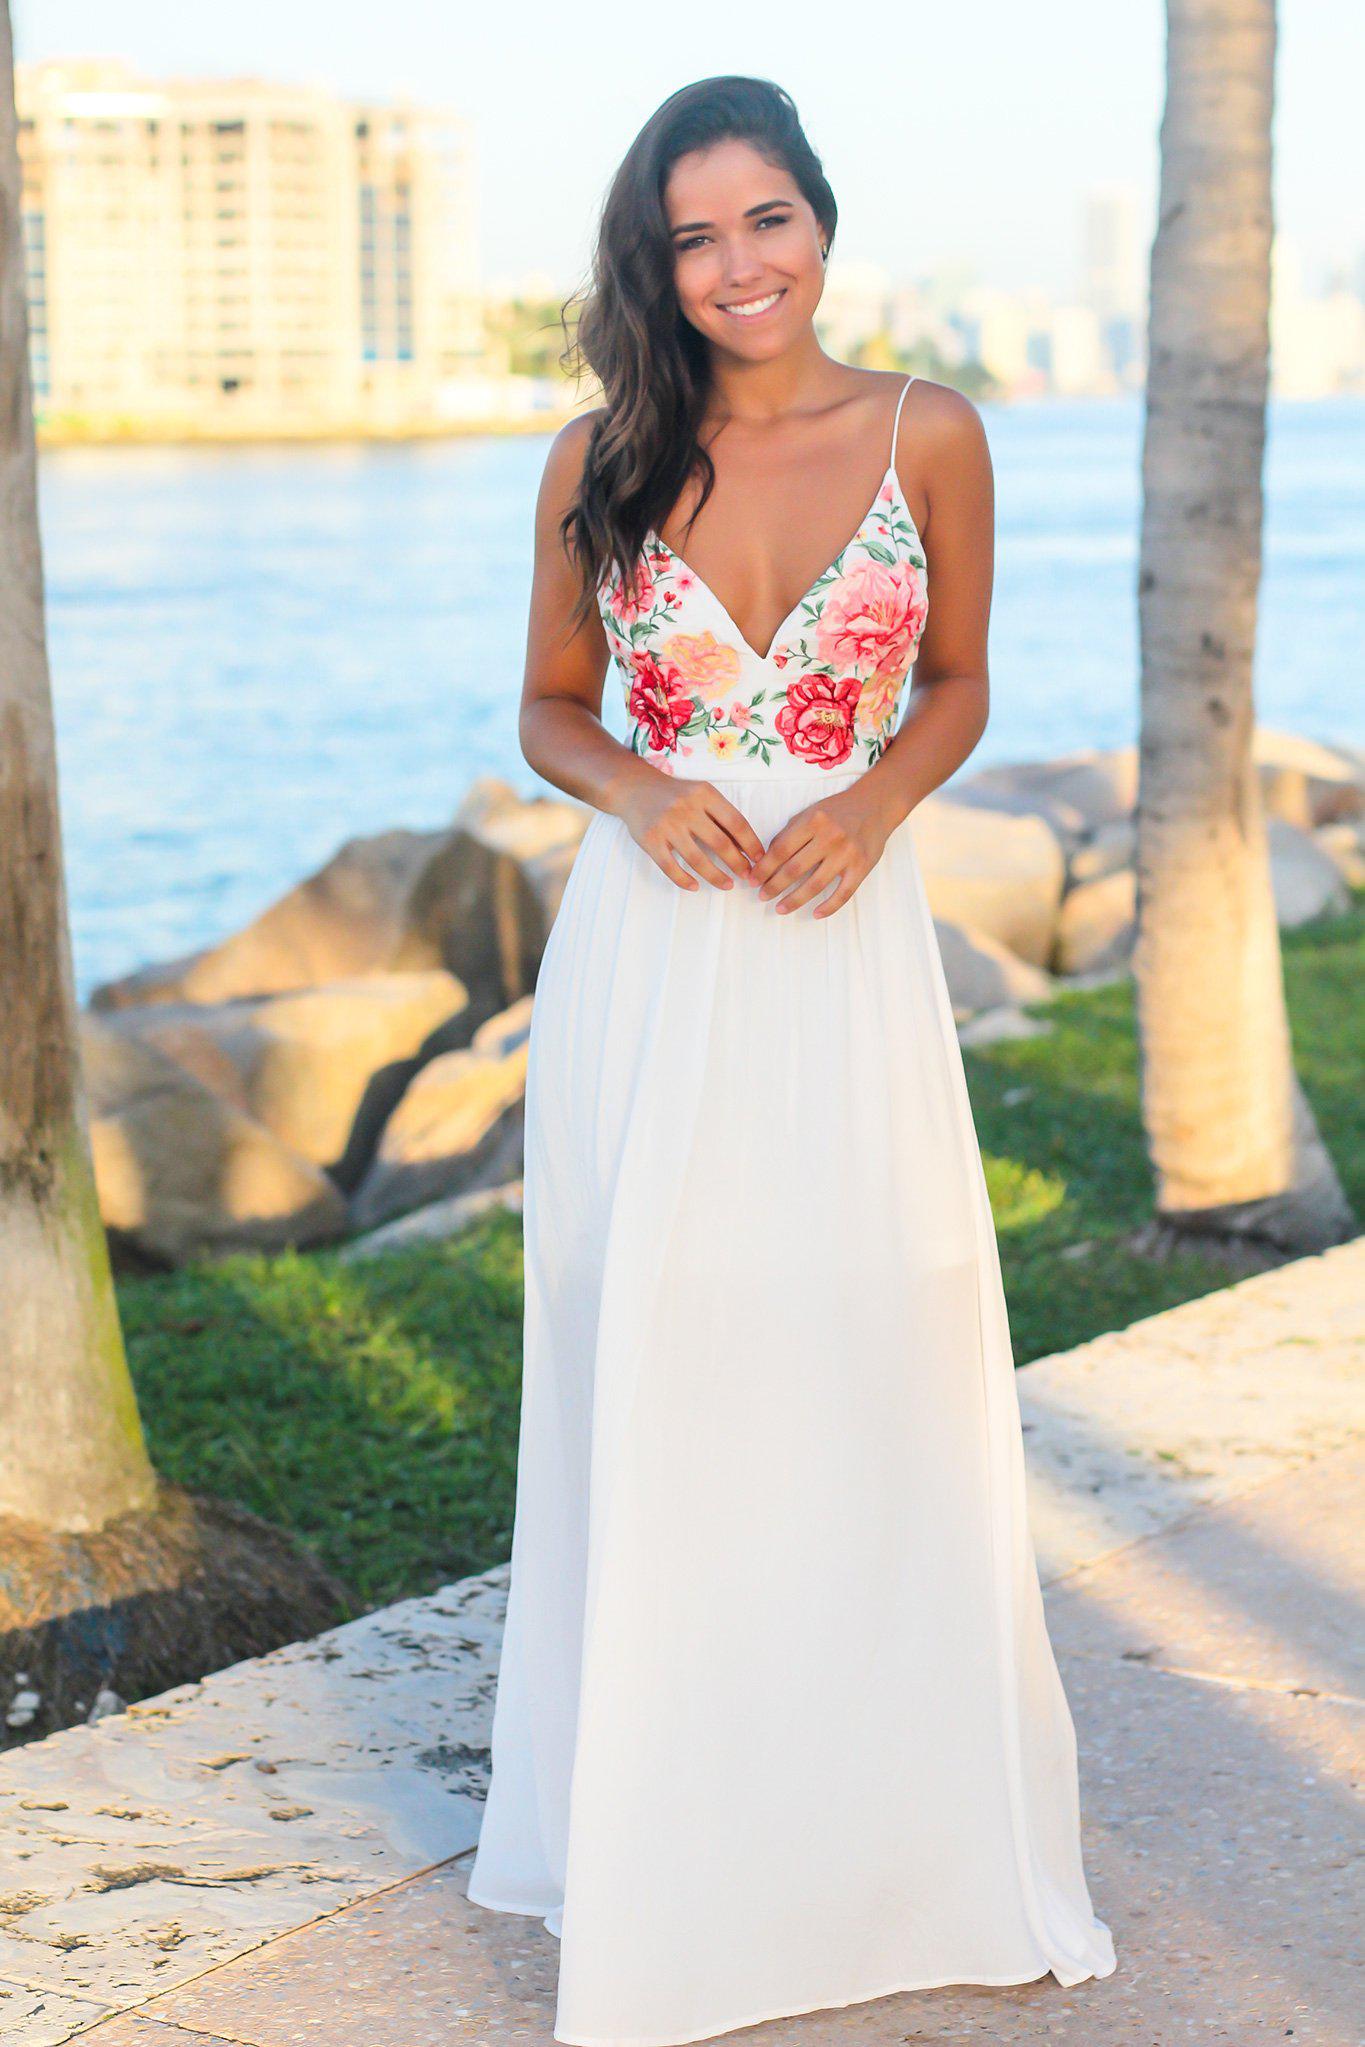 long white embroidered dress